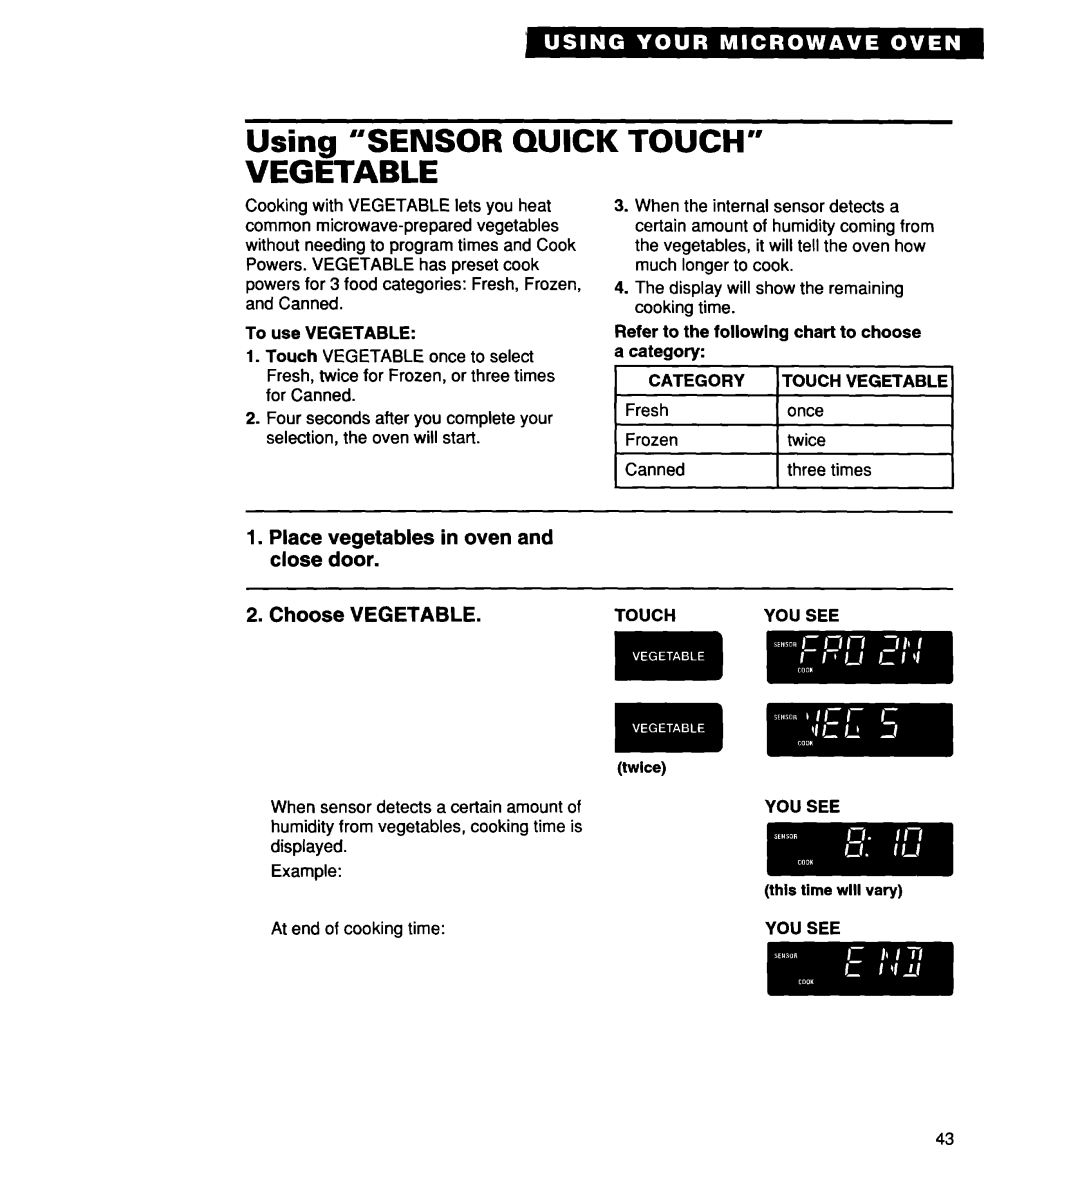 Whirlpool MH7135XE warranty Using “SENSOR QUICK TOUCH” VEGETABLE, Place vegetables in oven and close door, Choose VEGETABLE 